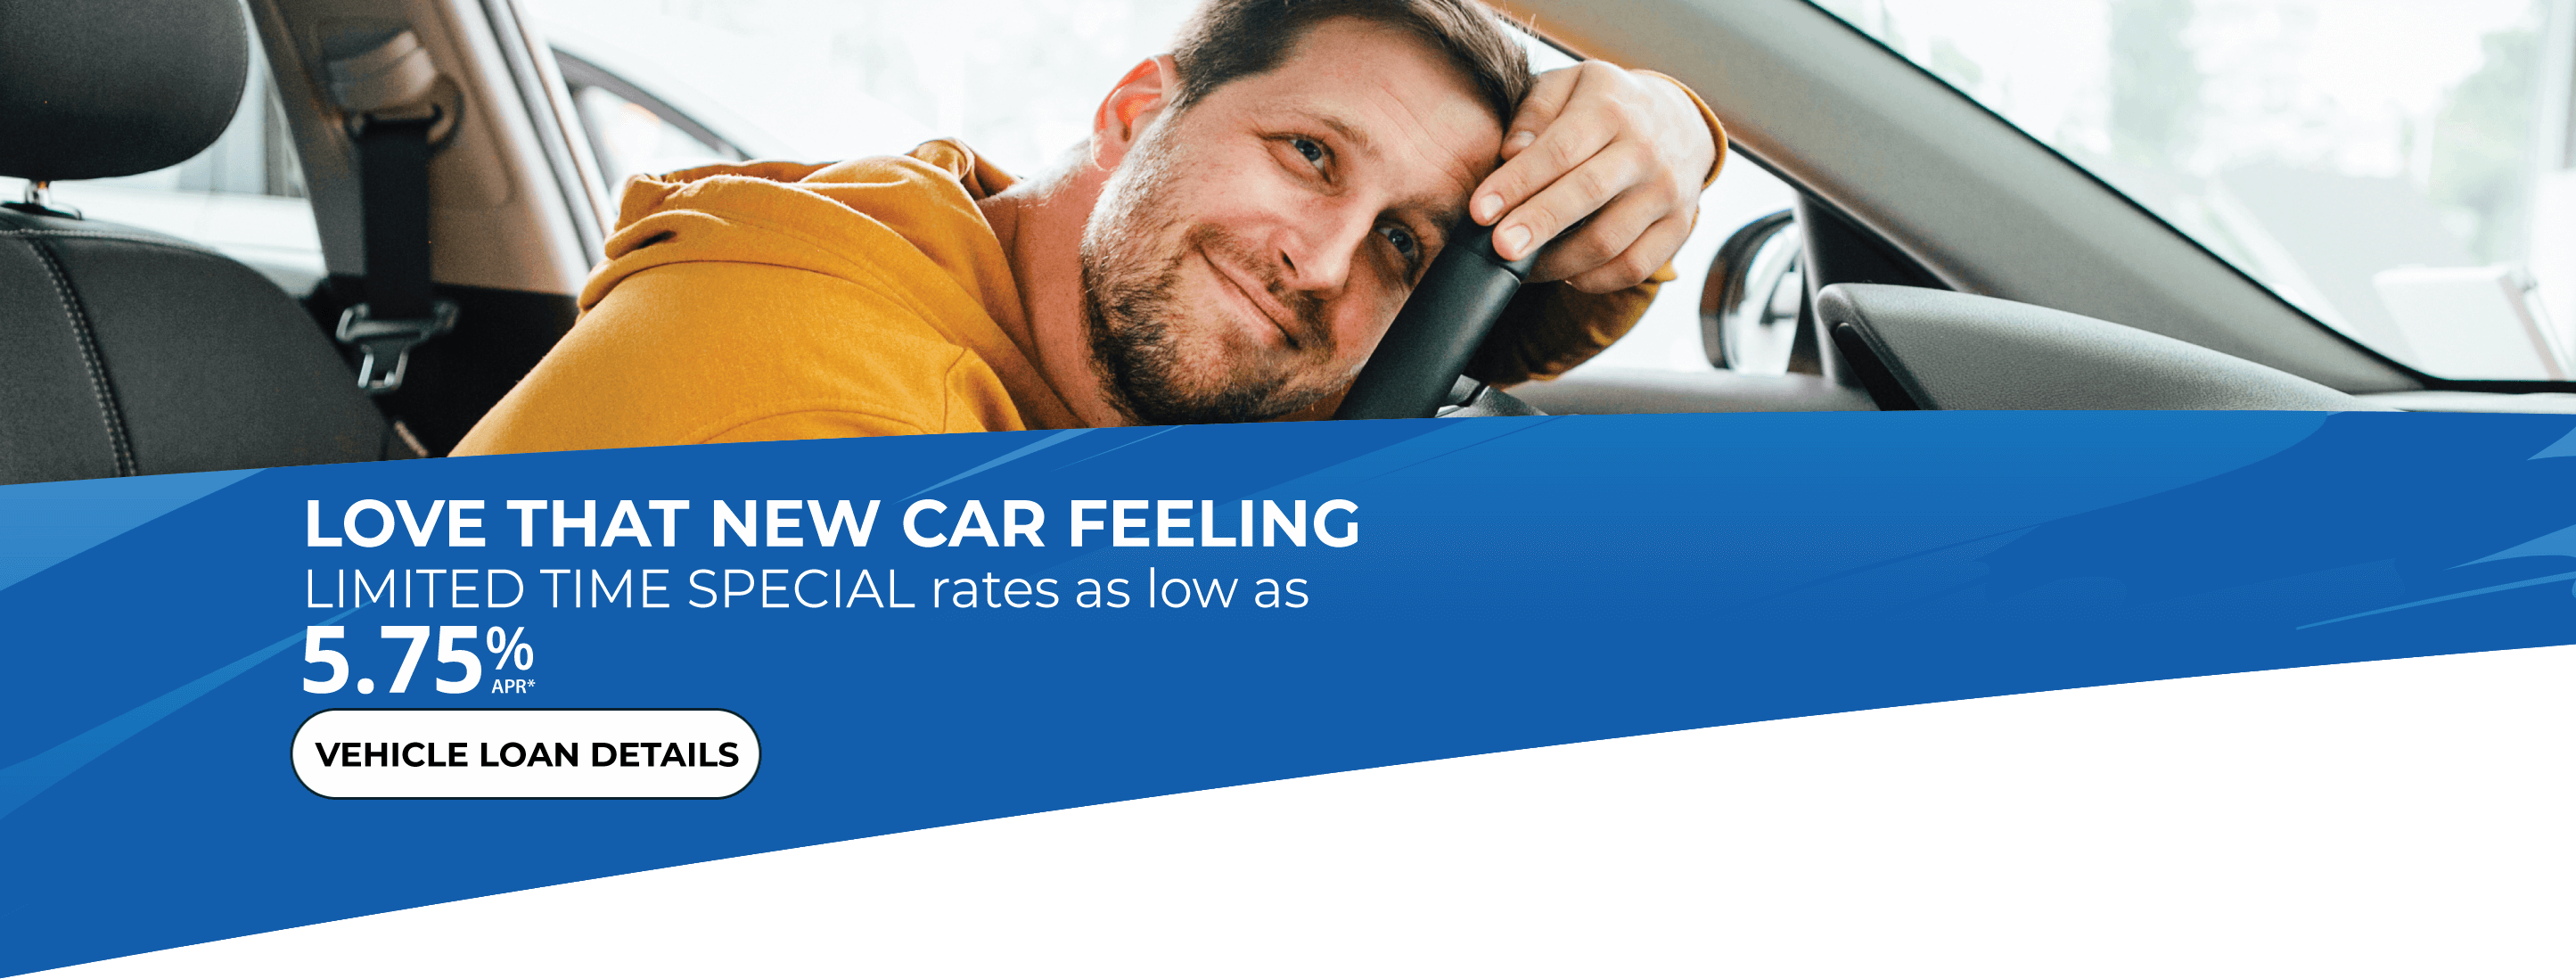 Limited Time Special rates as low as 5.75% APR*